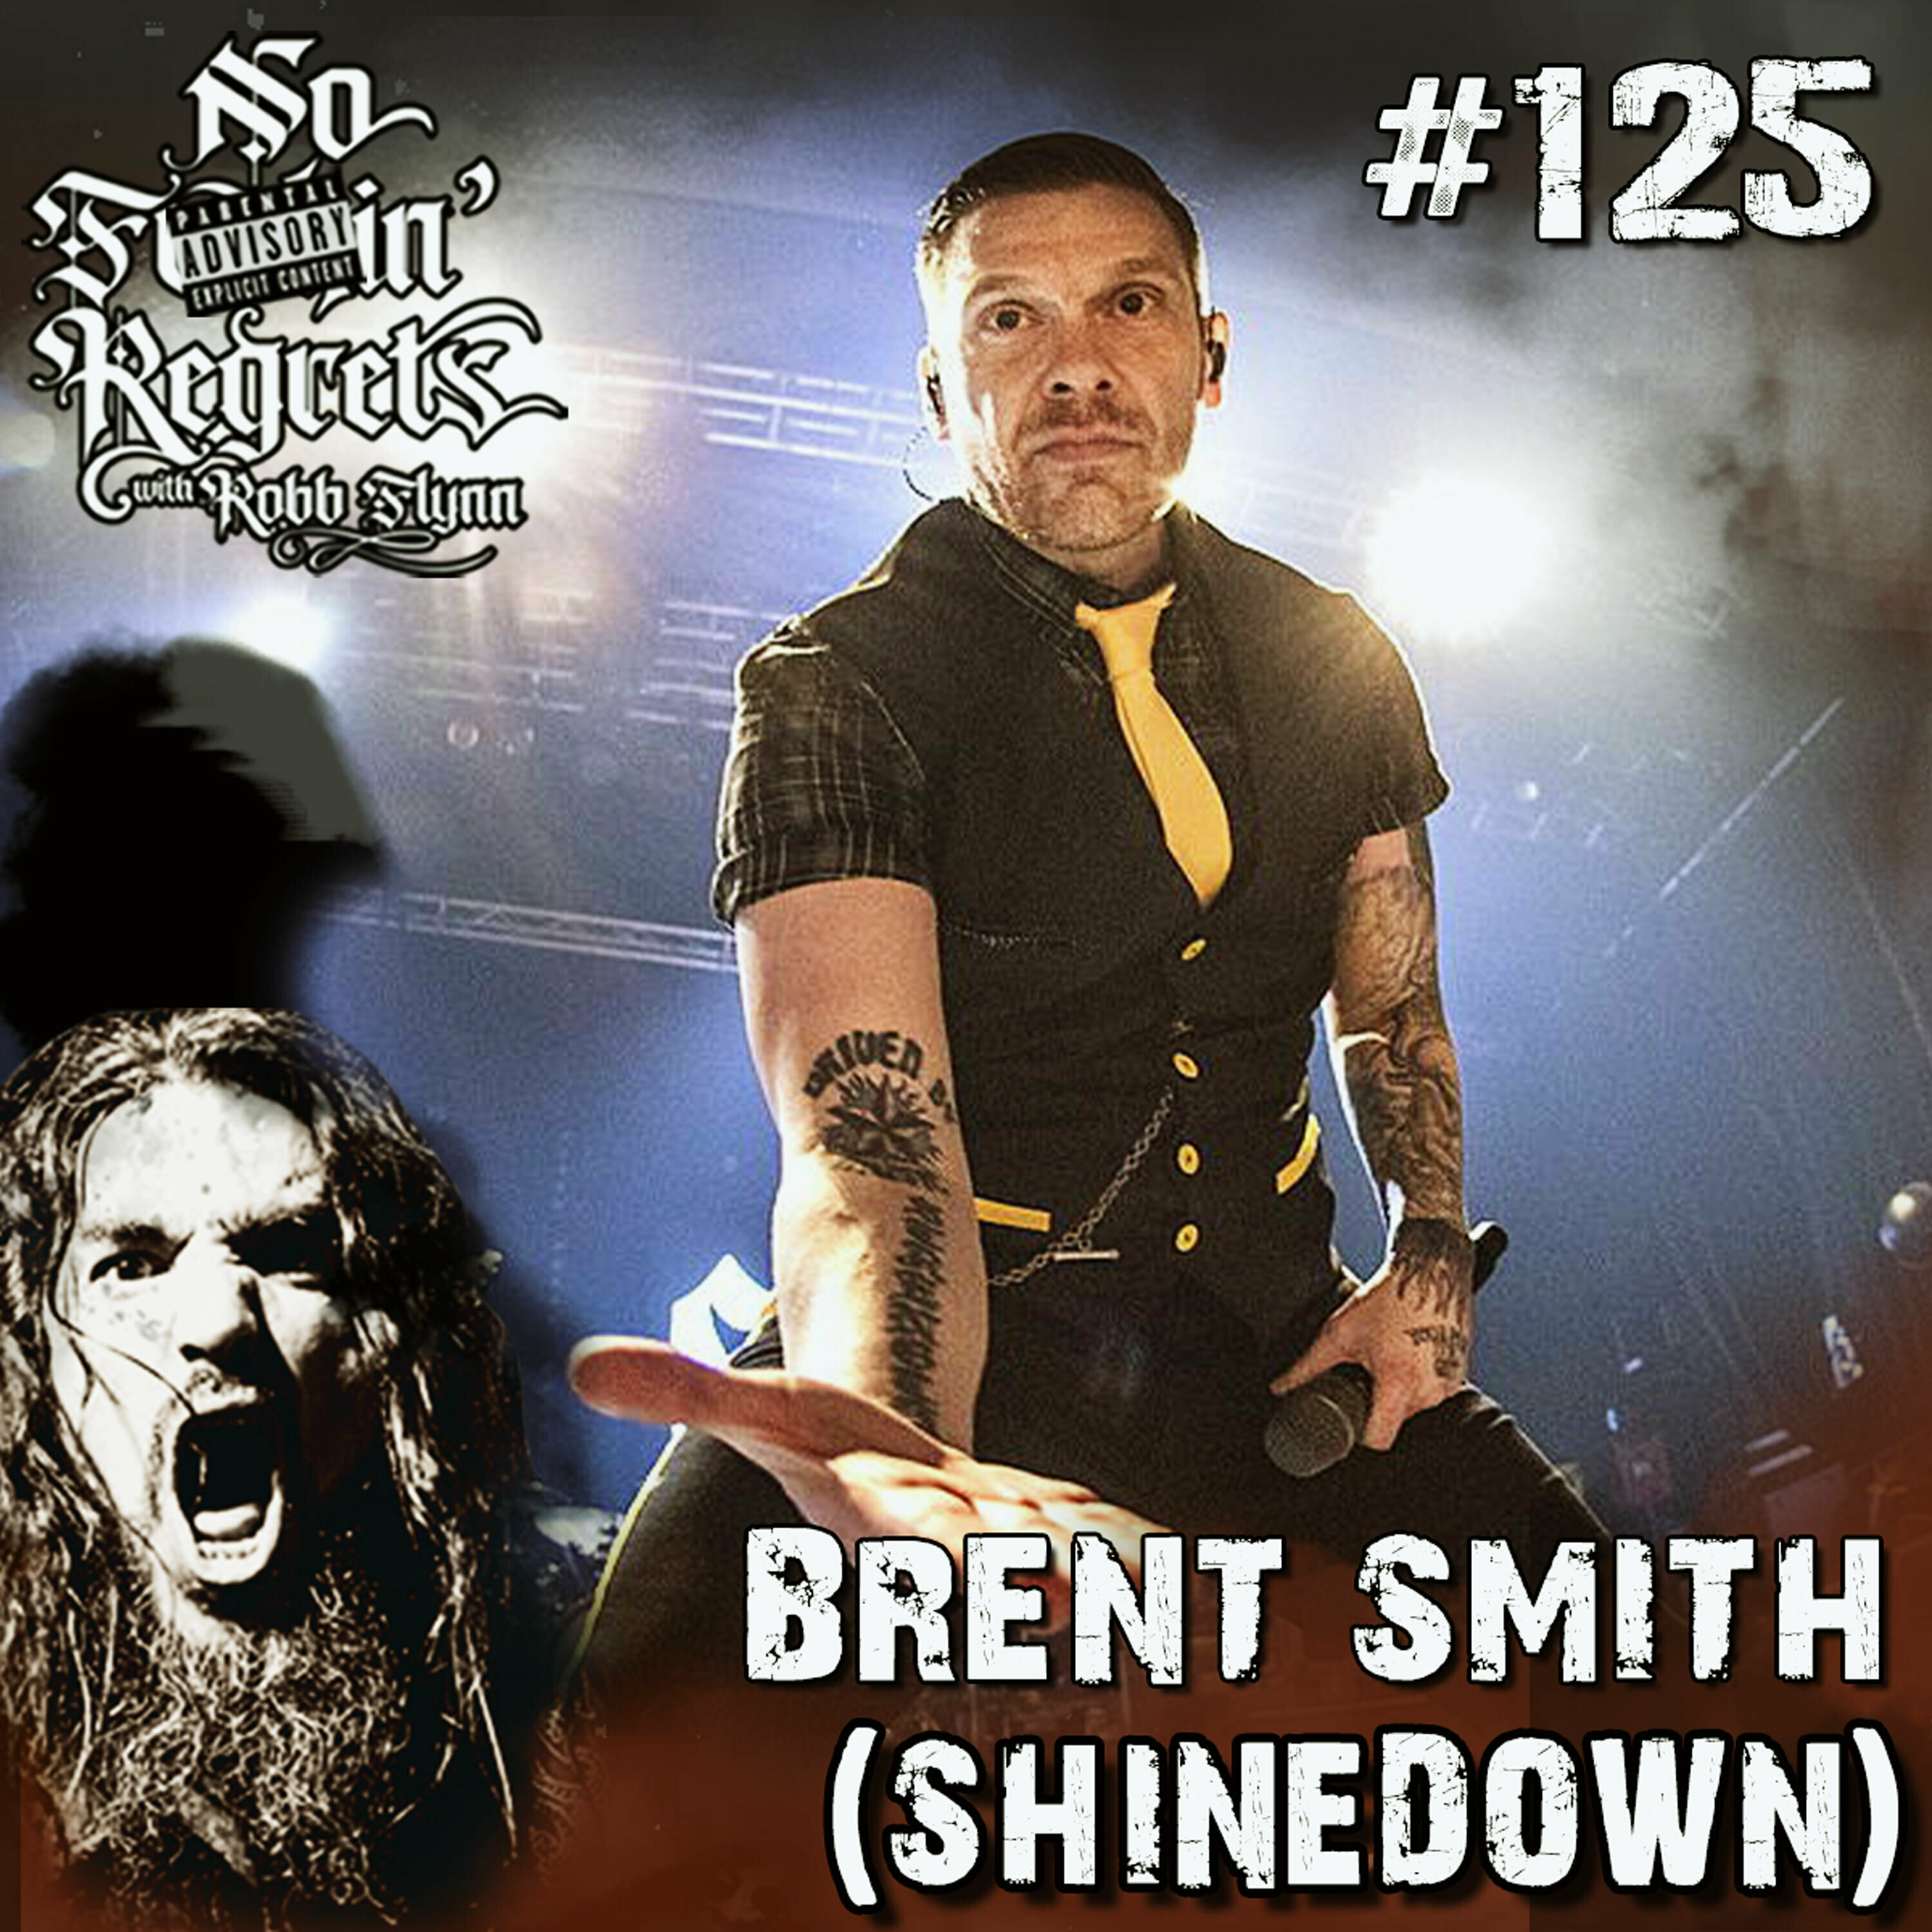 NFR #125 - BRENT SMITH (SHINEDOWN)